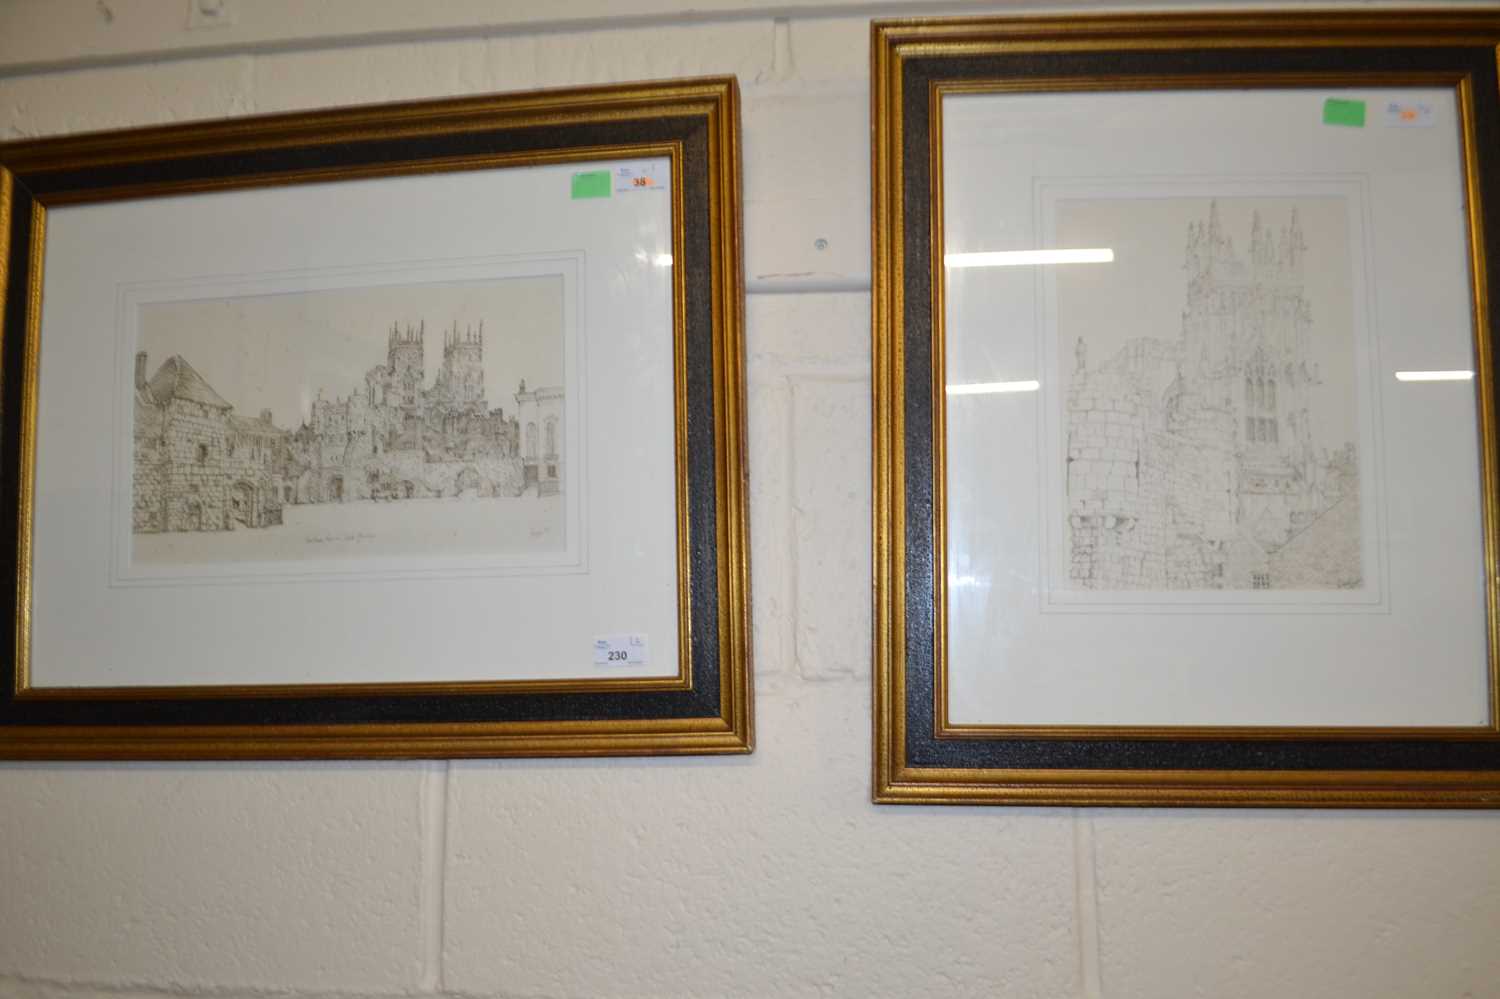 Print of York Minster and one other